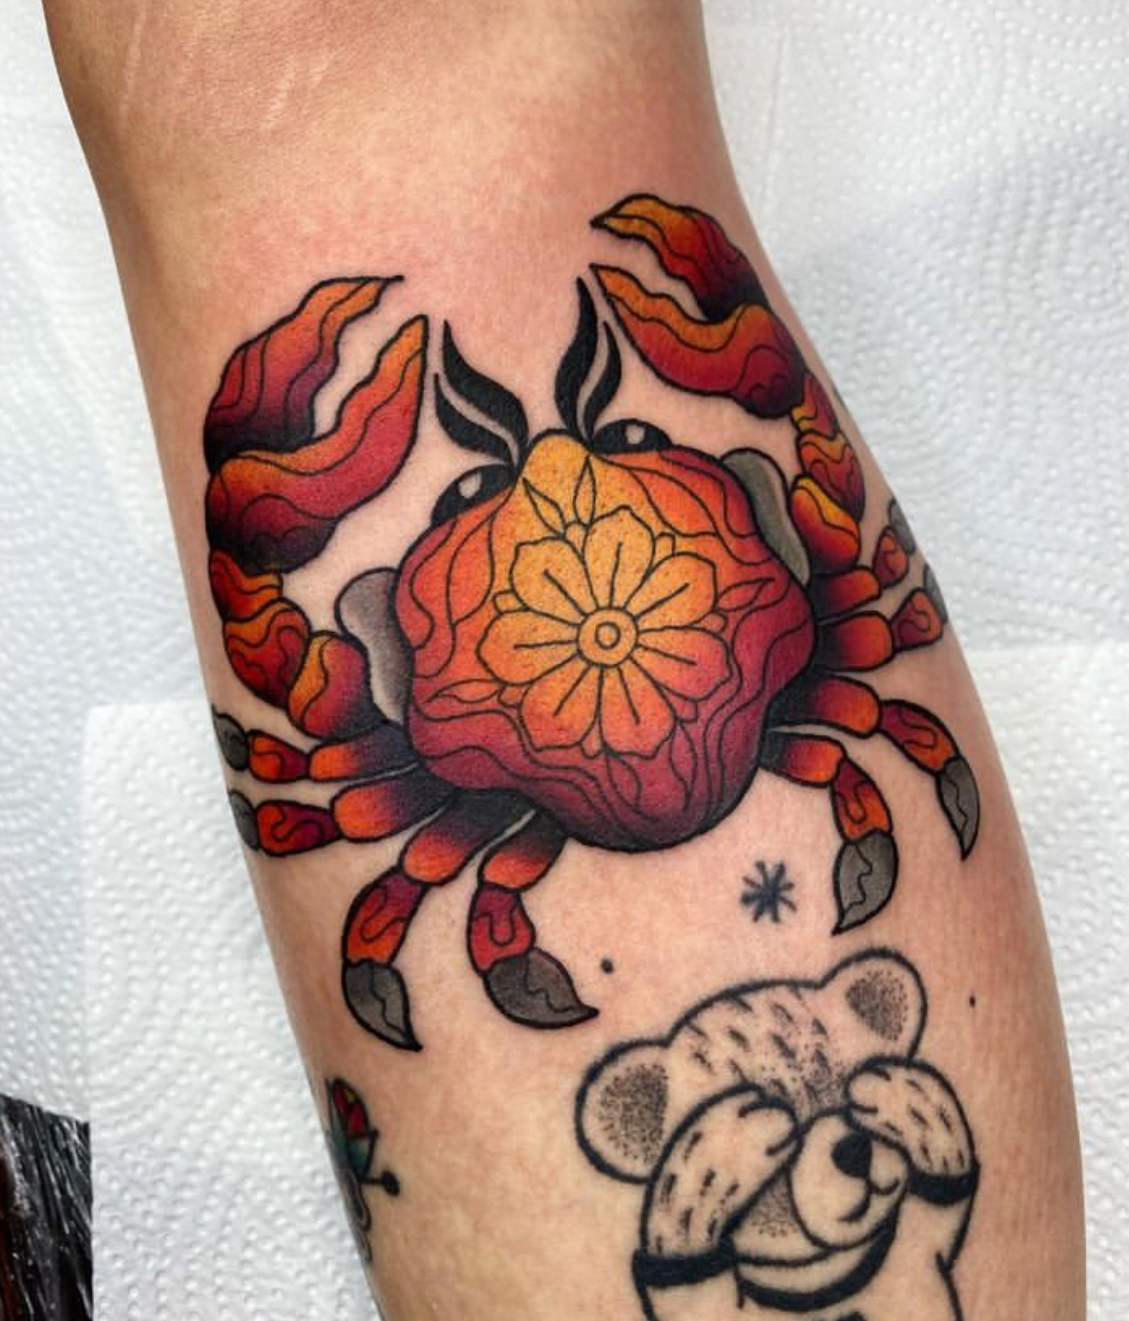 Samurai crab by Jordan  Artist jcrab For all enquiries please contact  the artist directly or contact the studio via  07  Instagram